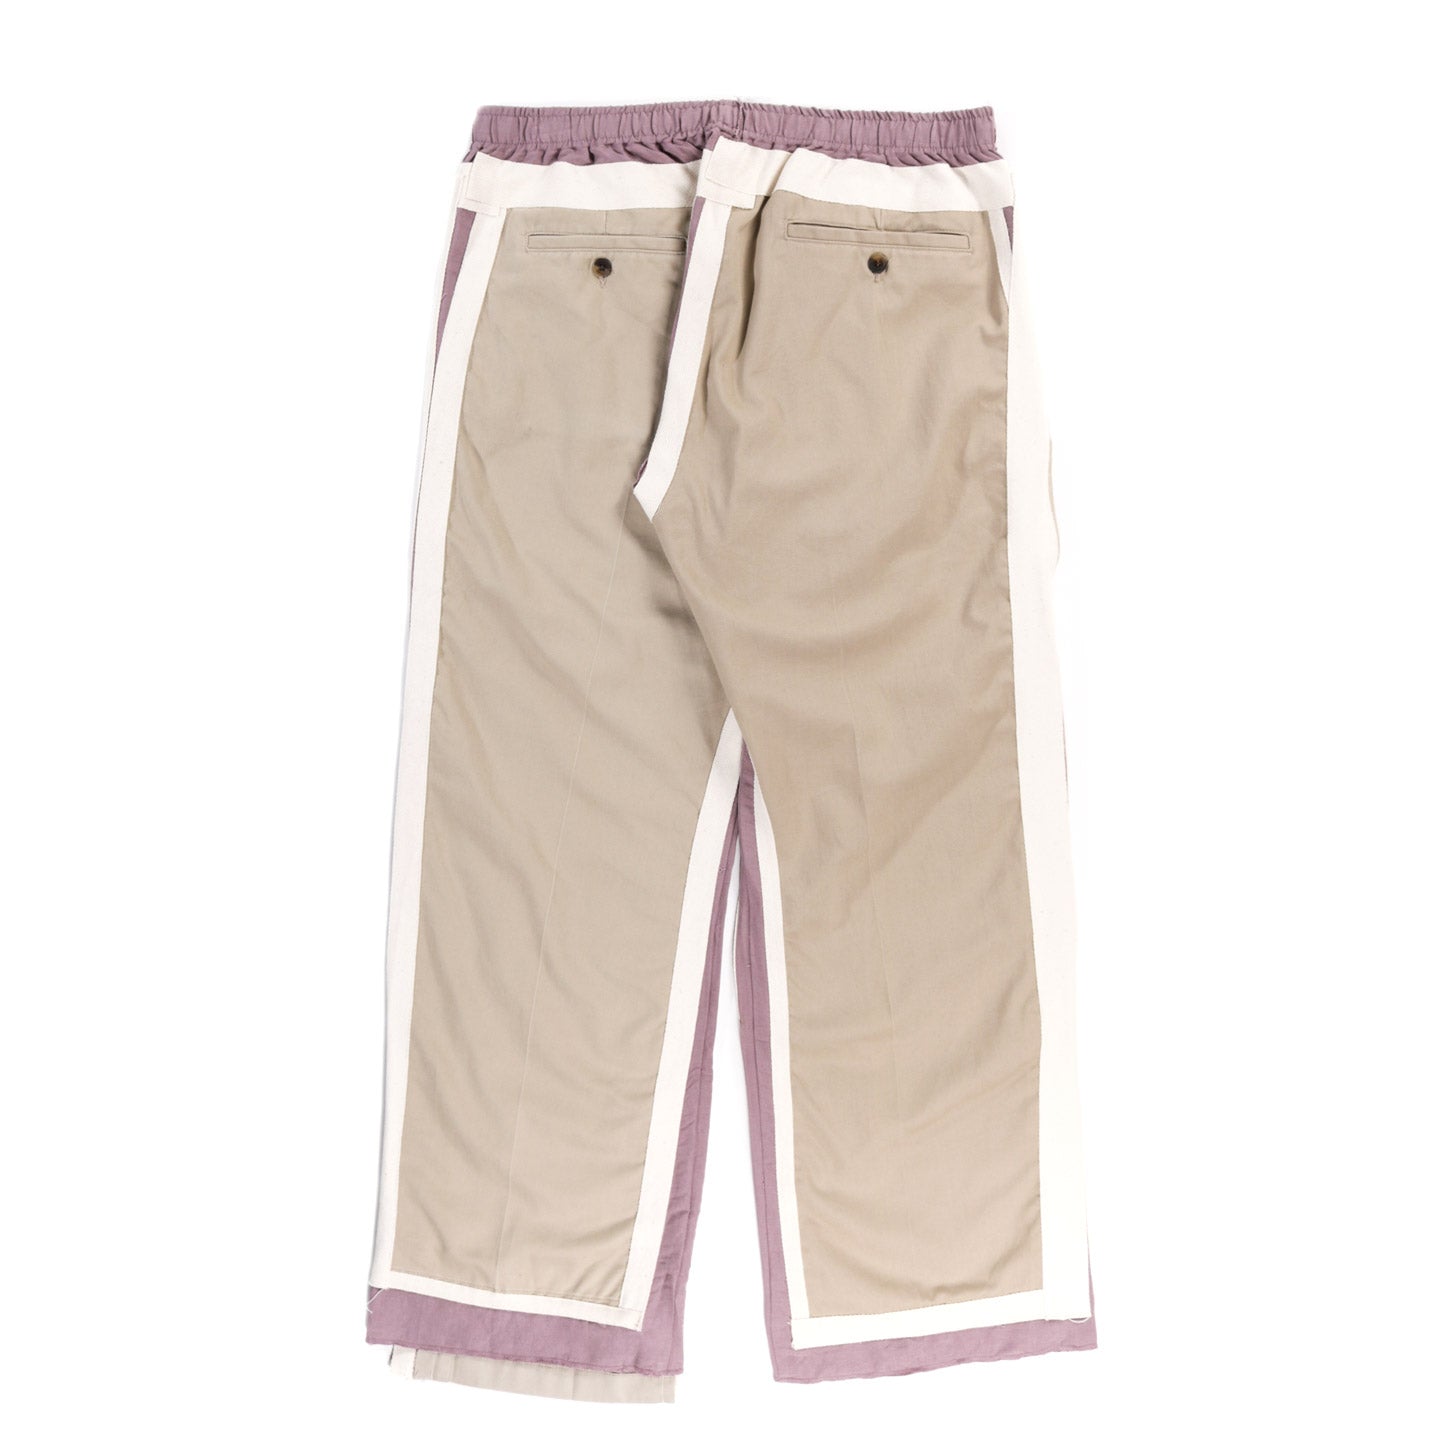 REBUILD BY NEEDLES CHINO COVERED PANT SALMON - L (A)